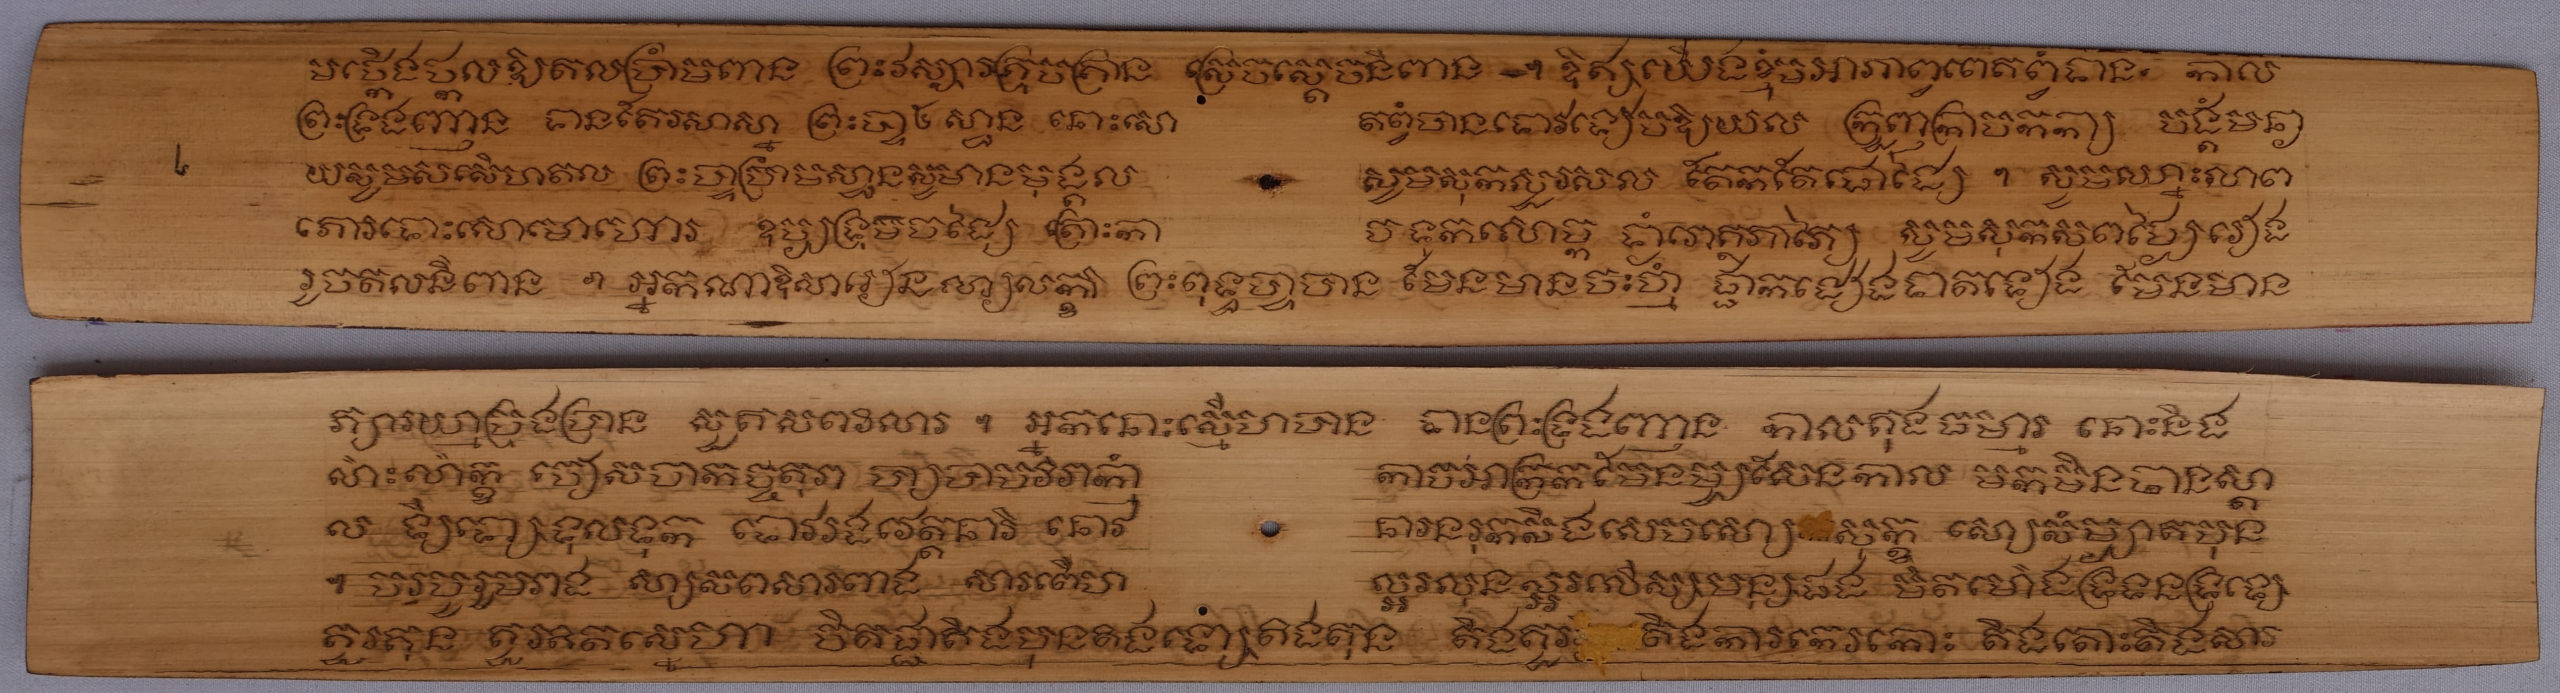 Inscription of a "dharma song" Hymn to the Buddhaʻs Feet. The poem is traditionally chanted with complex melodies in Cambodian rituals. Photo courtesy of Trent Walker.